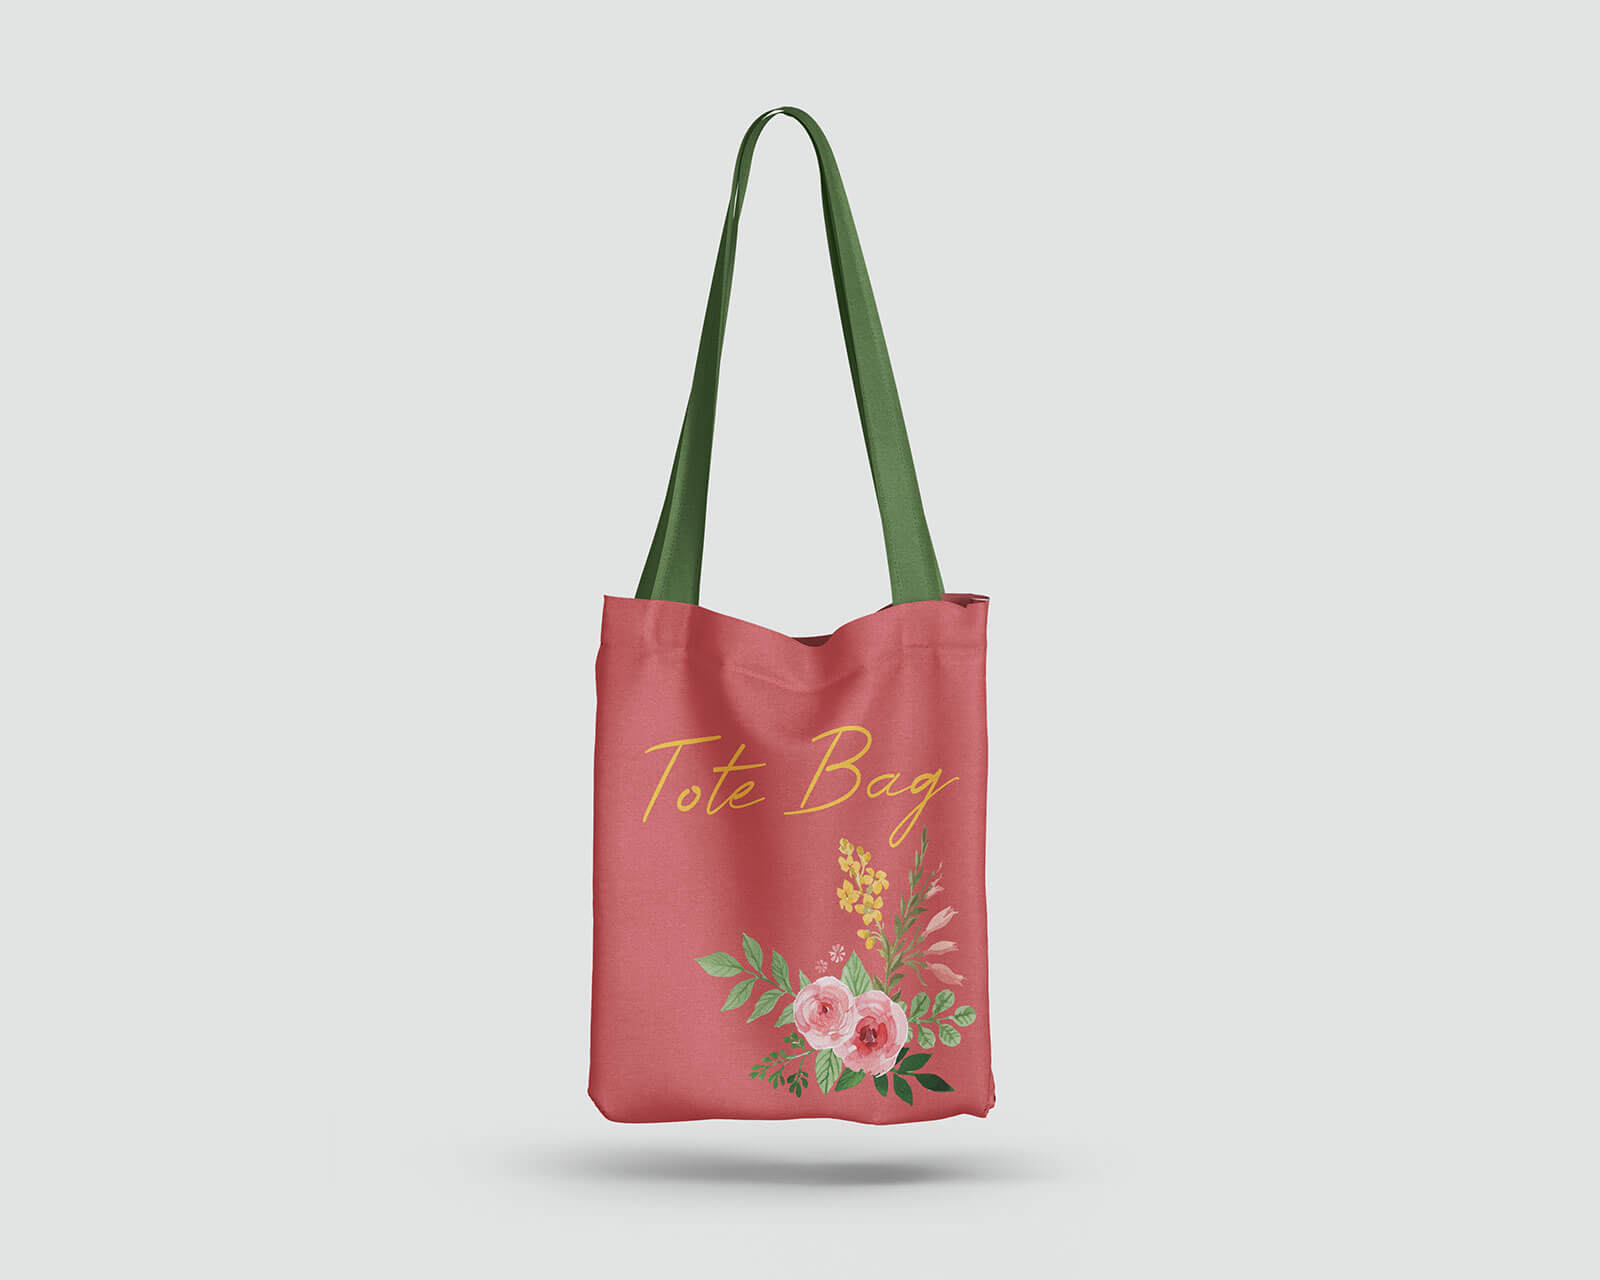 Premium PSD  Shopping bags on a transparent background 3d rendering